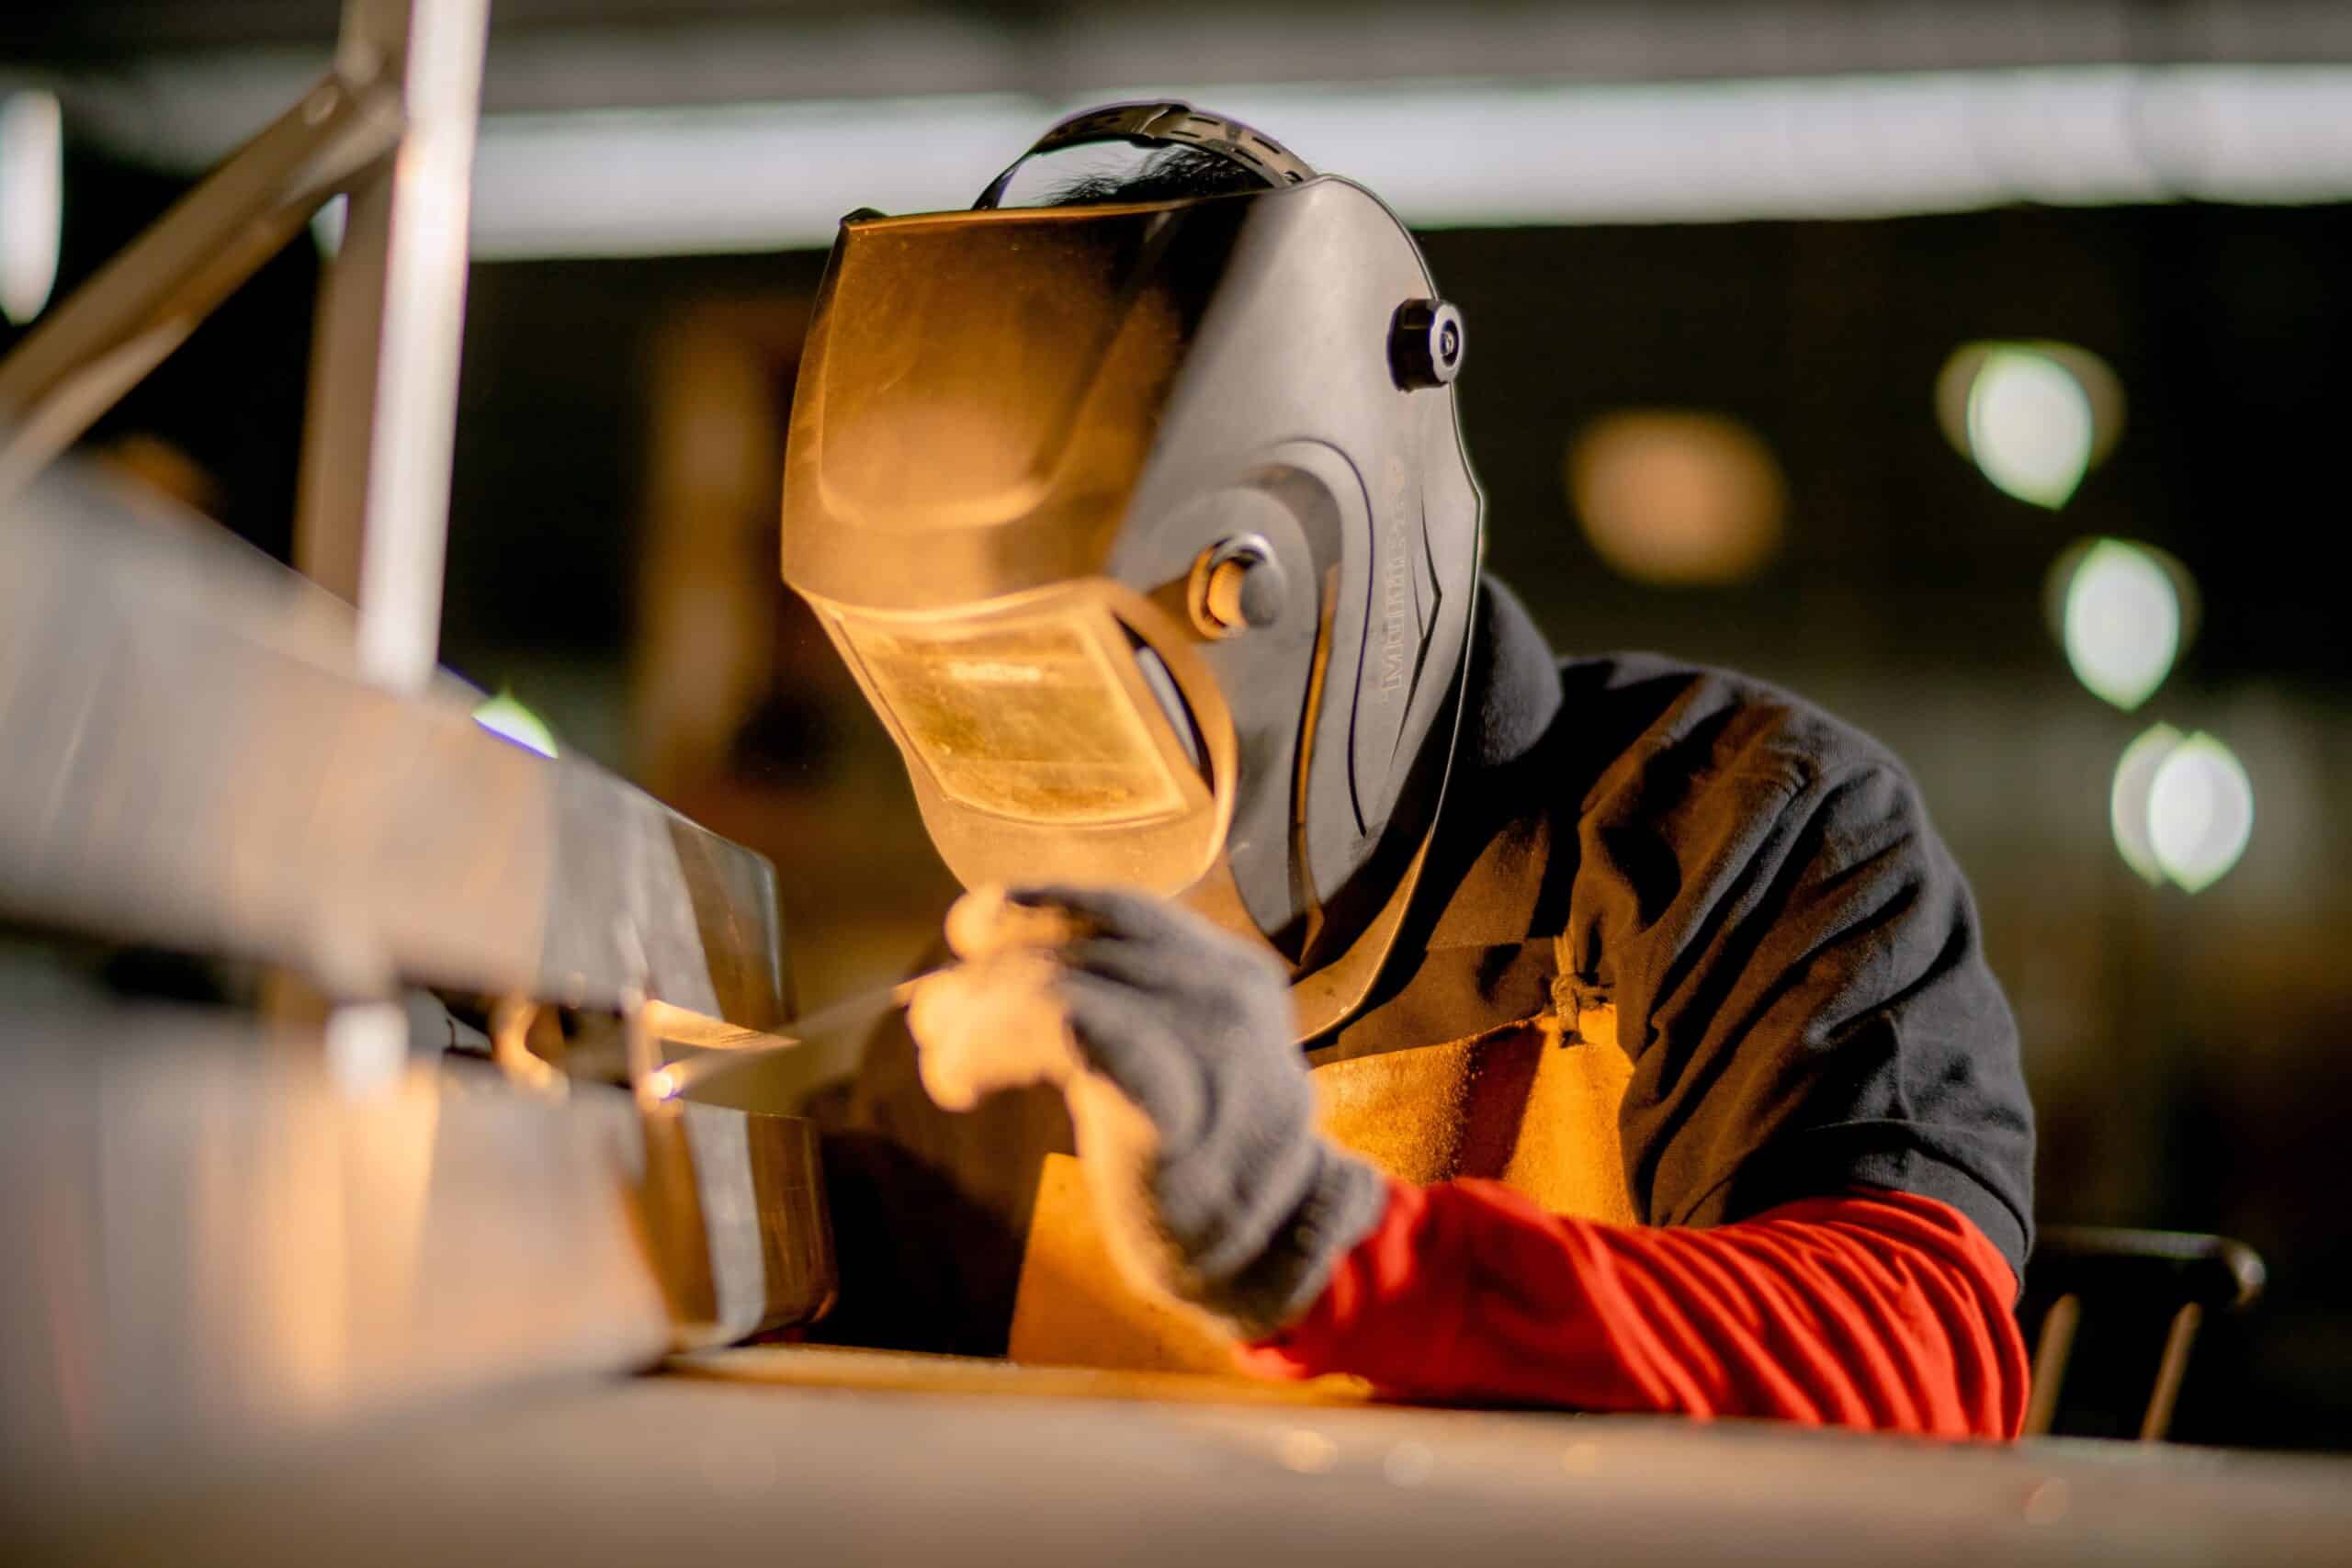 A man in a welding mask working on some machinery.